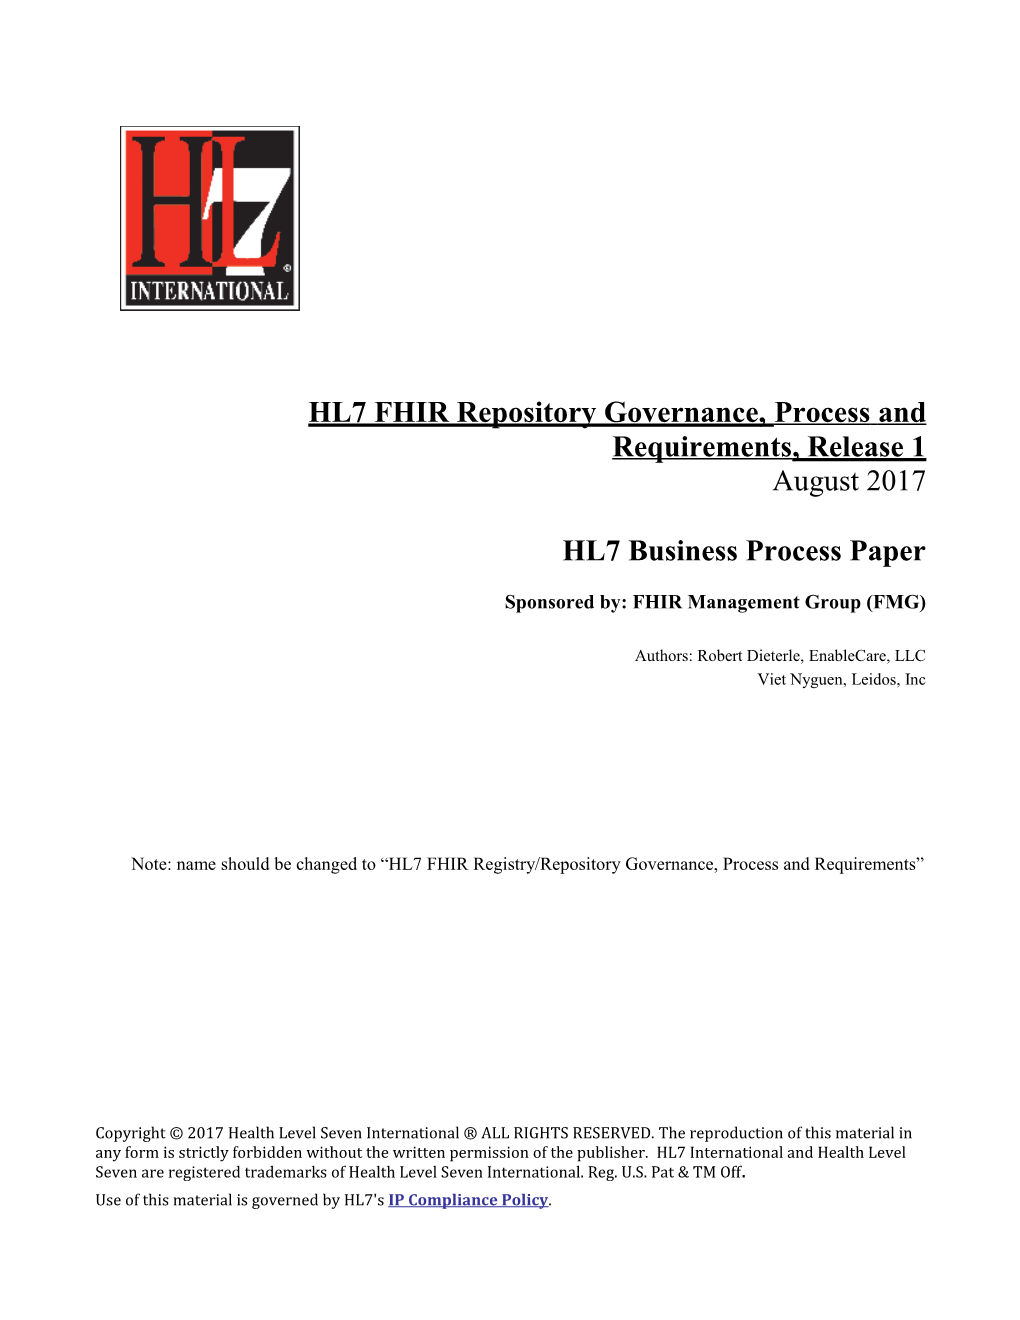 HL7 FHIR Repository Governance, Processand Requirements, Release 1